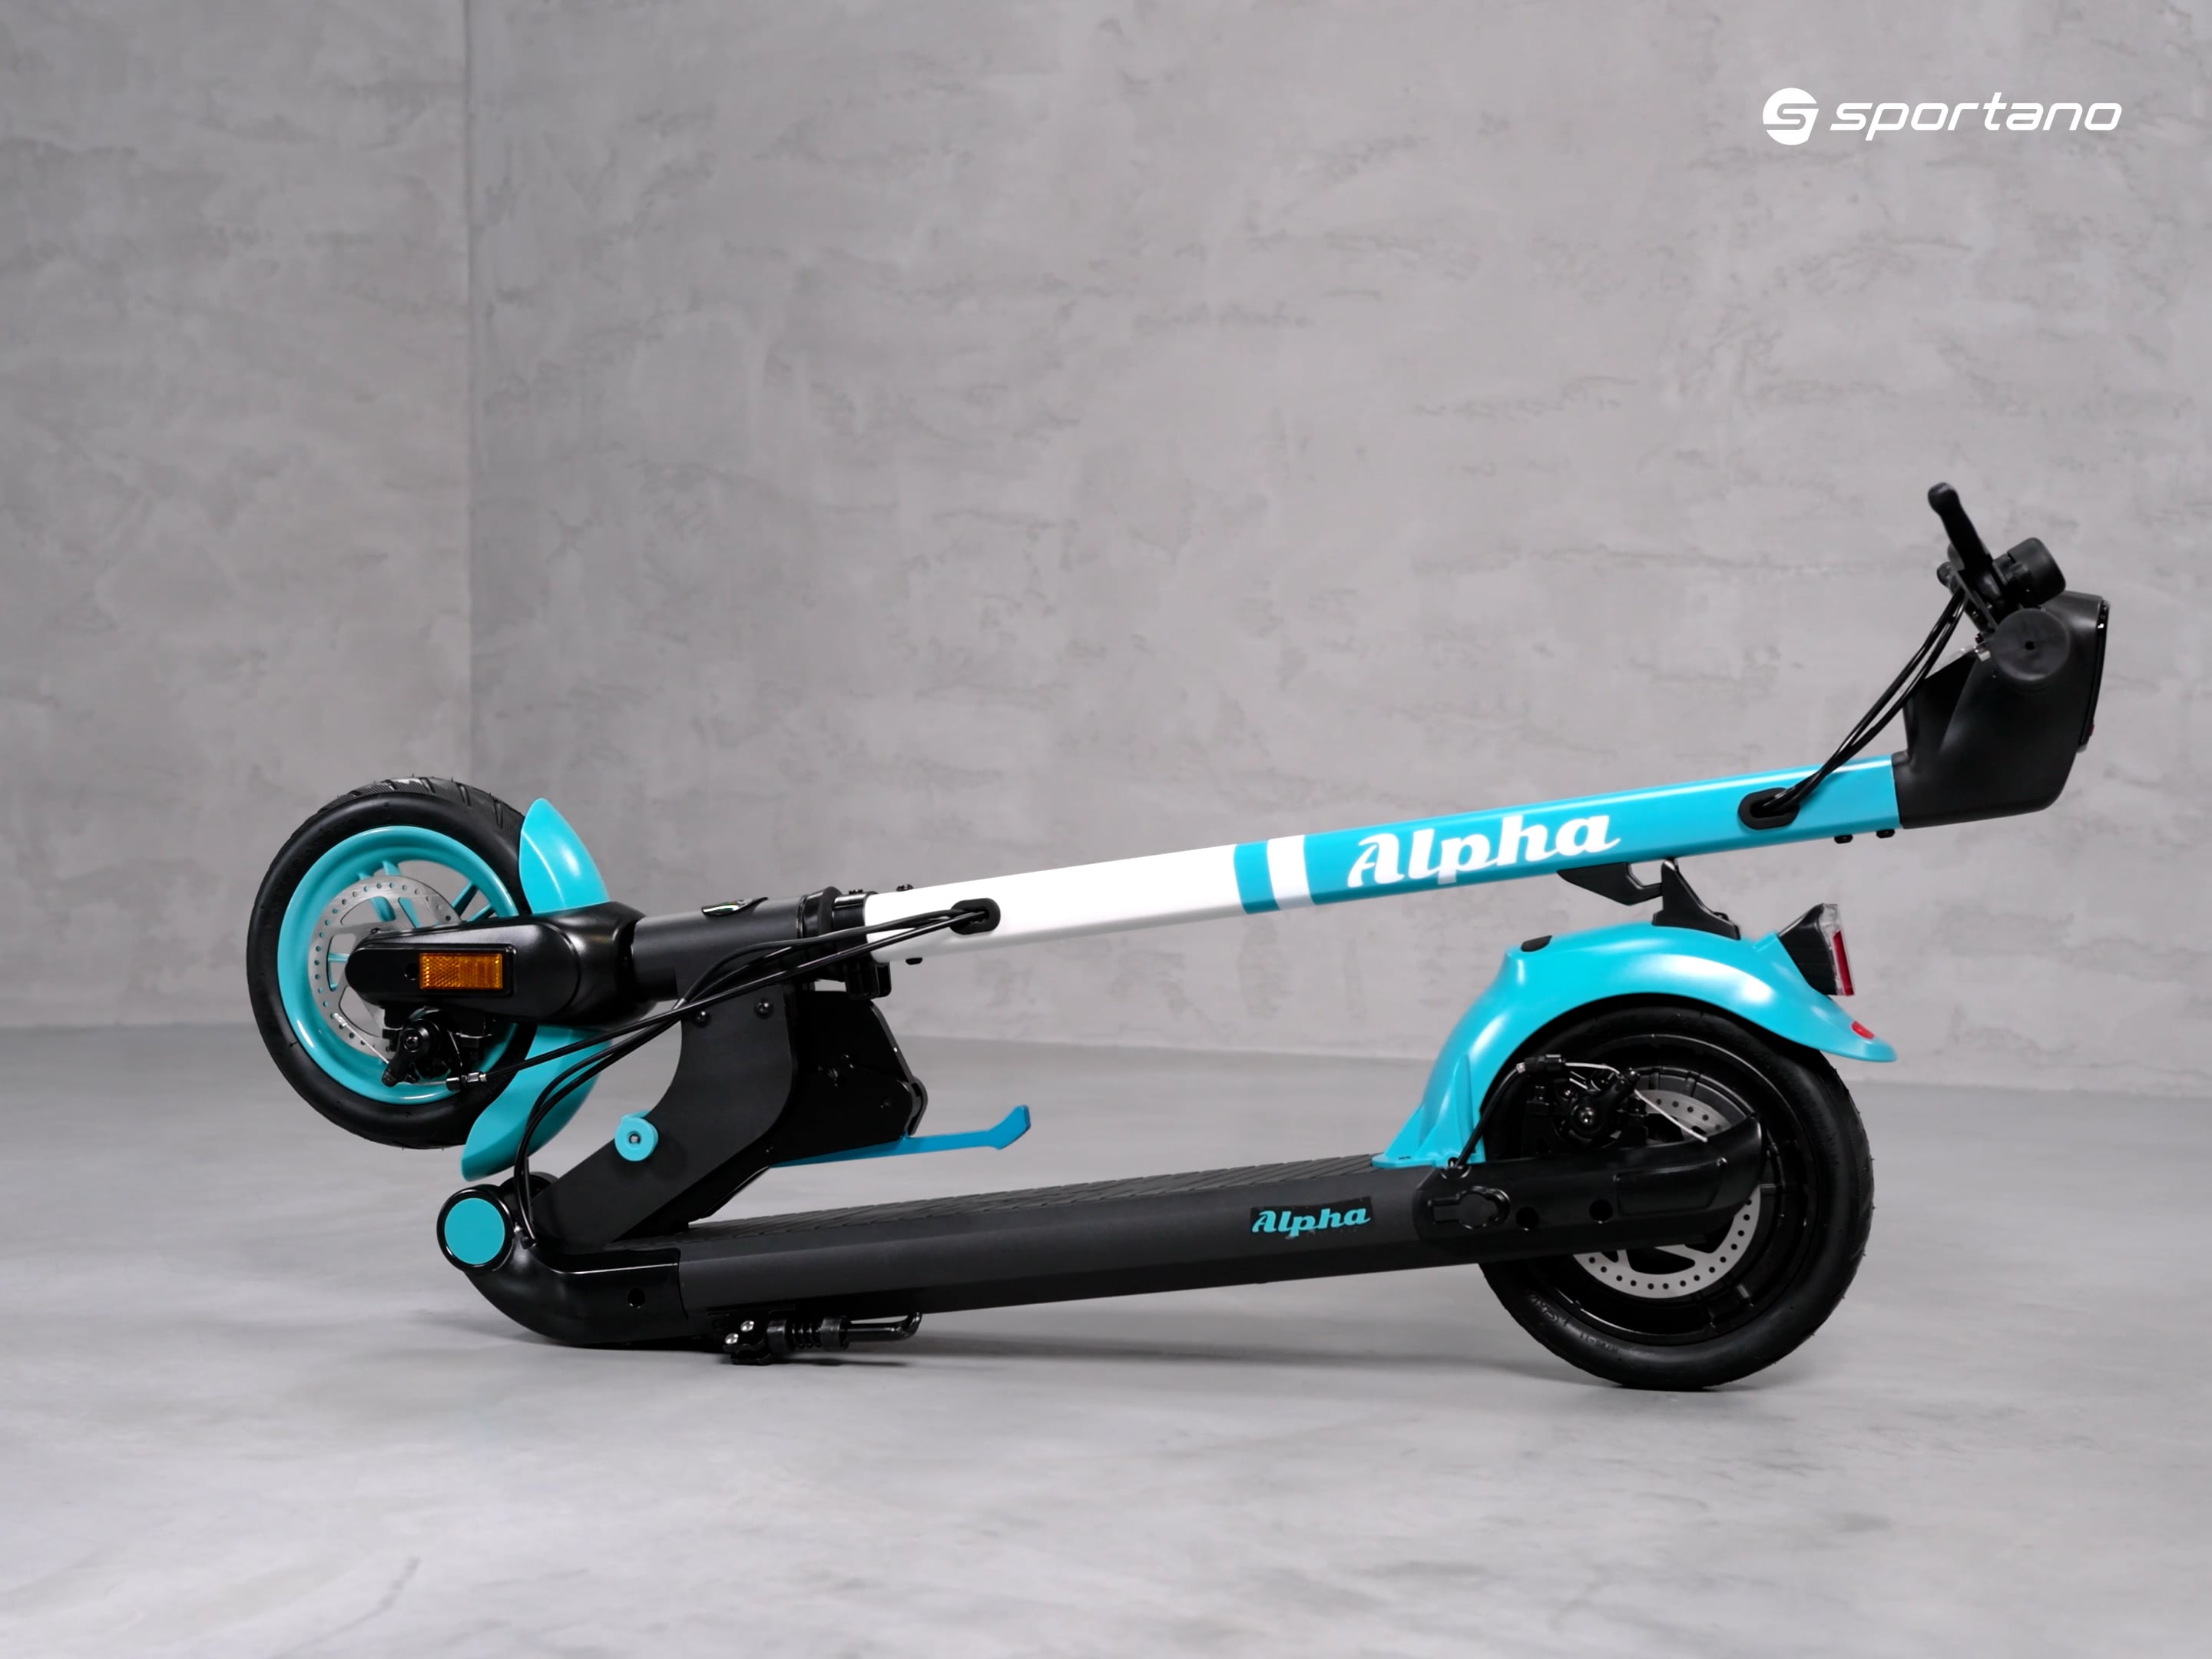 Frugal Alpha blue electric scooter H8510